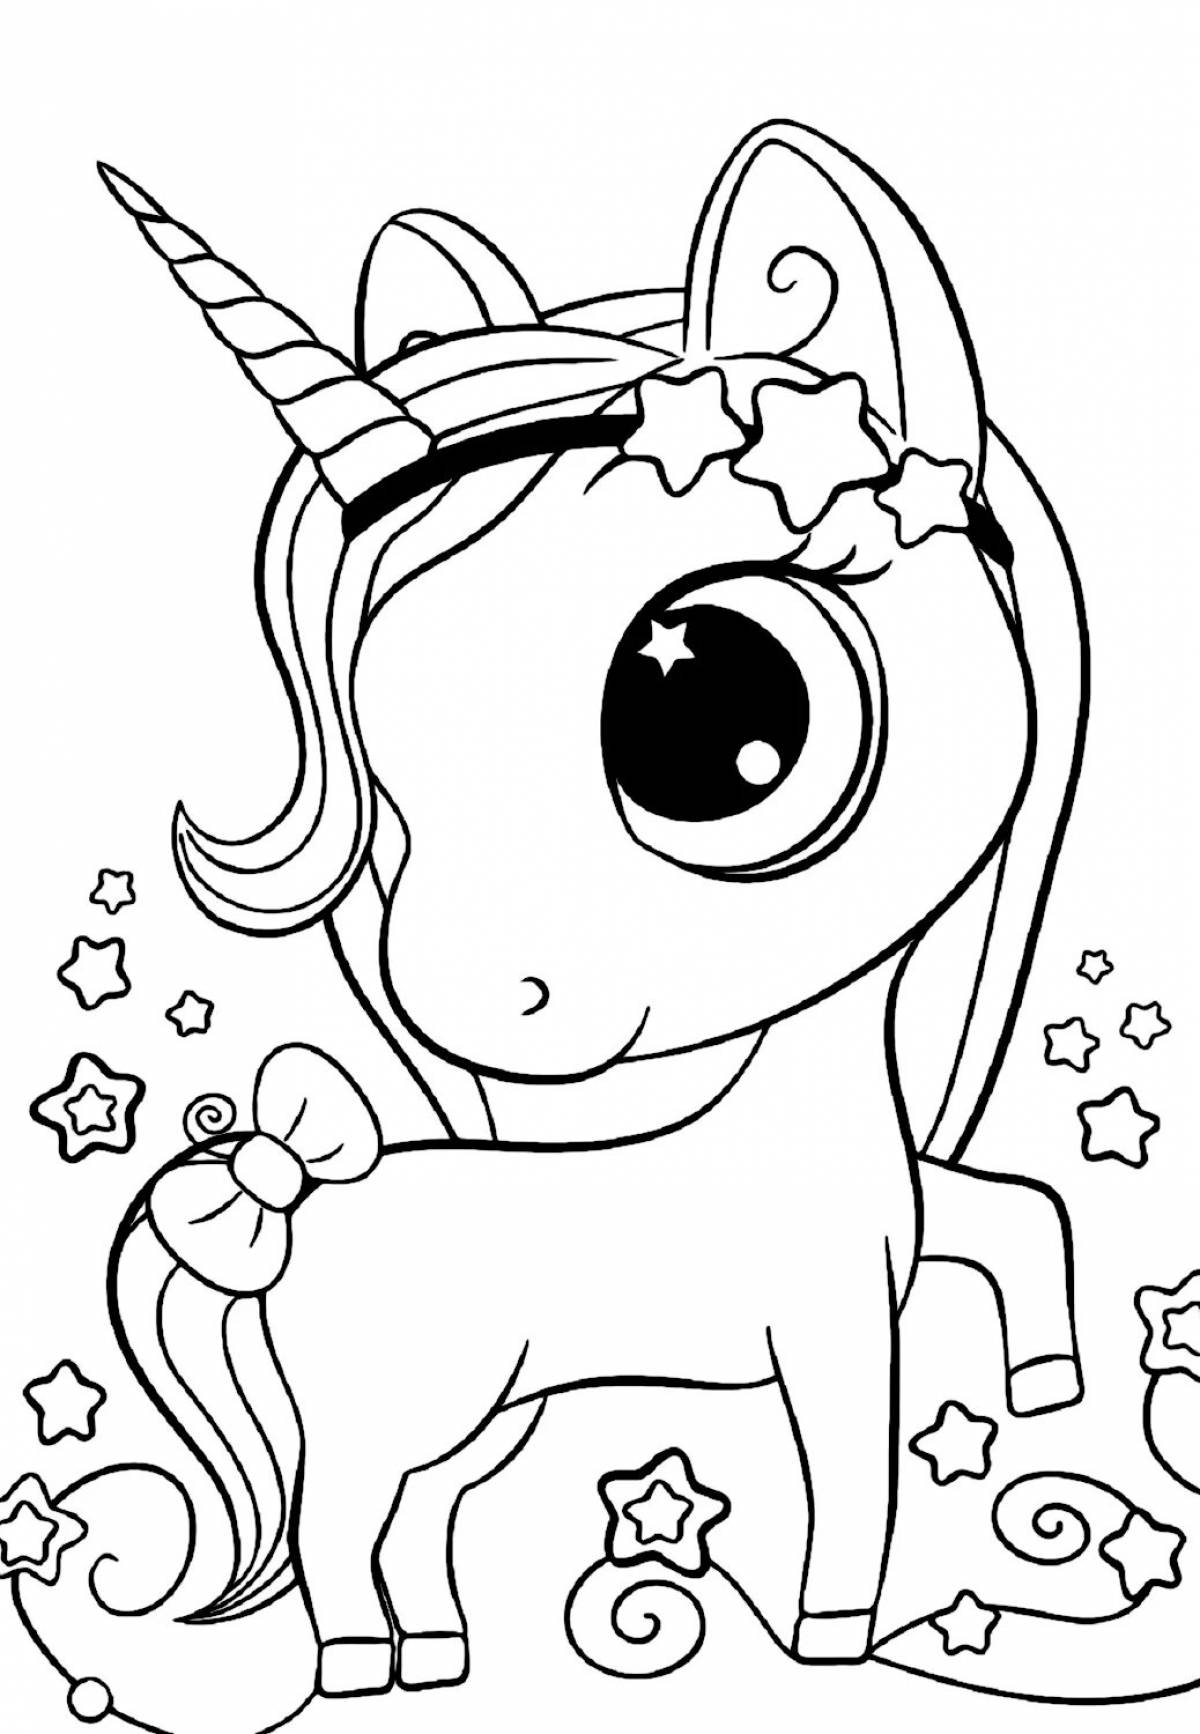 Happy coloring page unicorn for kids